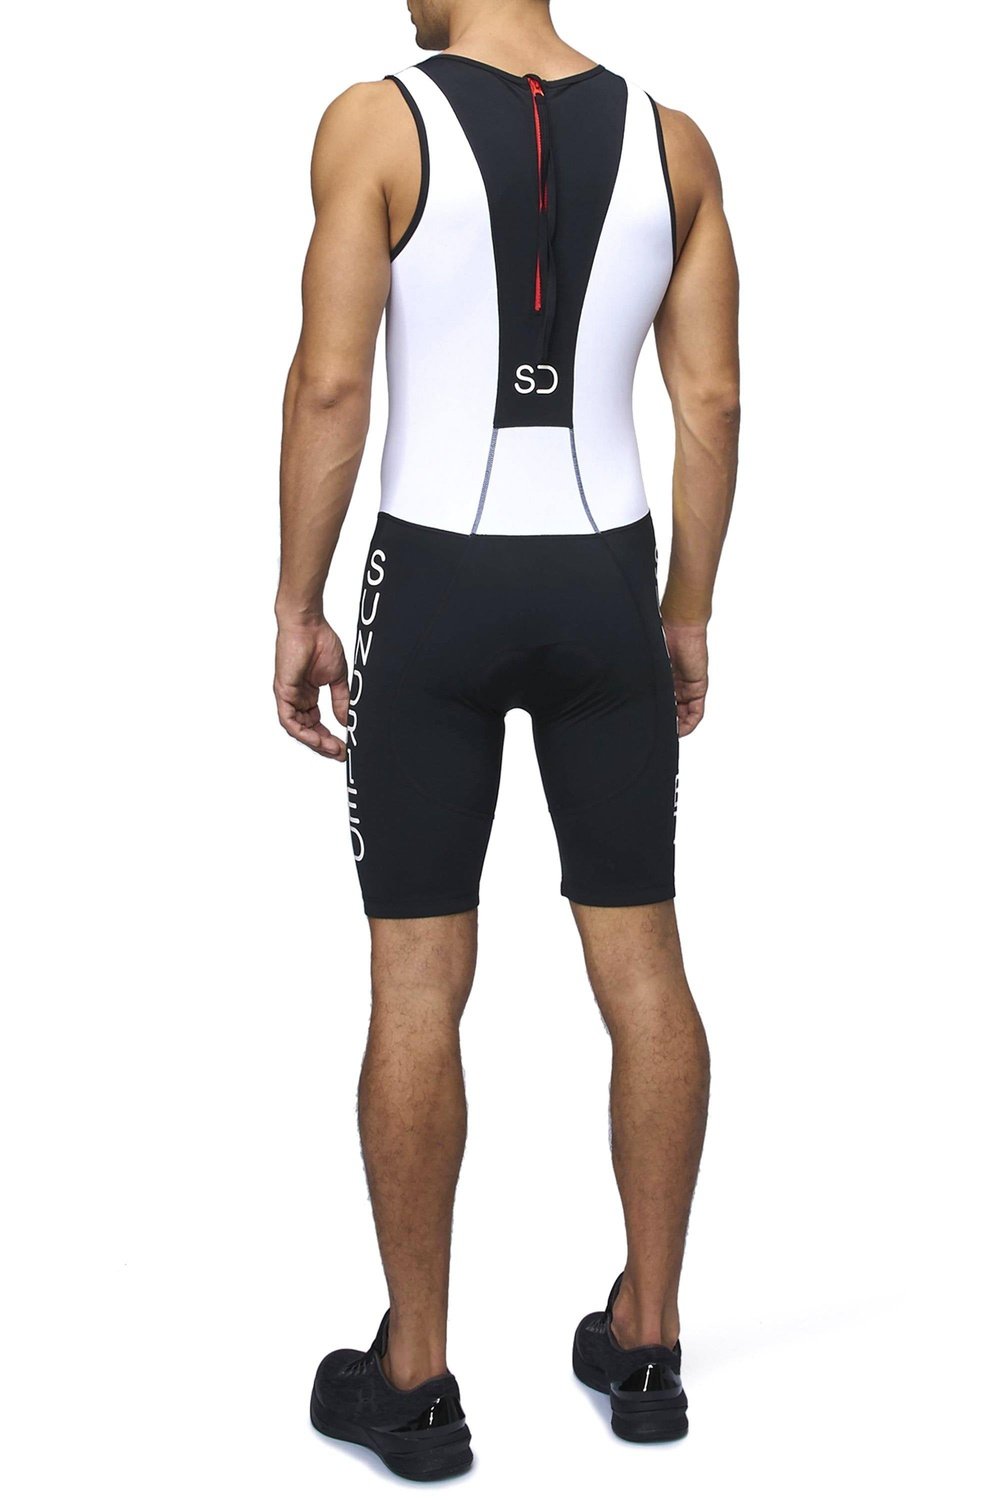 Sundried Men's Performance Tri Suit freeshipping - Sundried Activewear